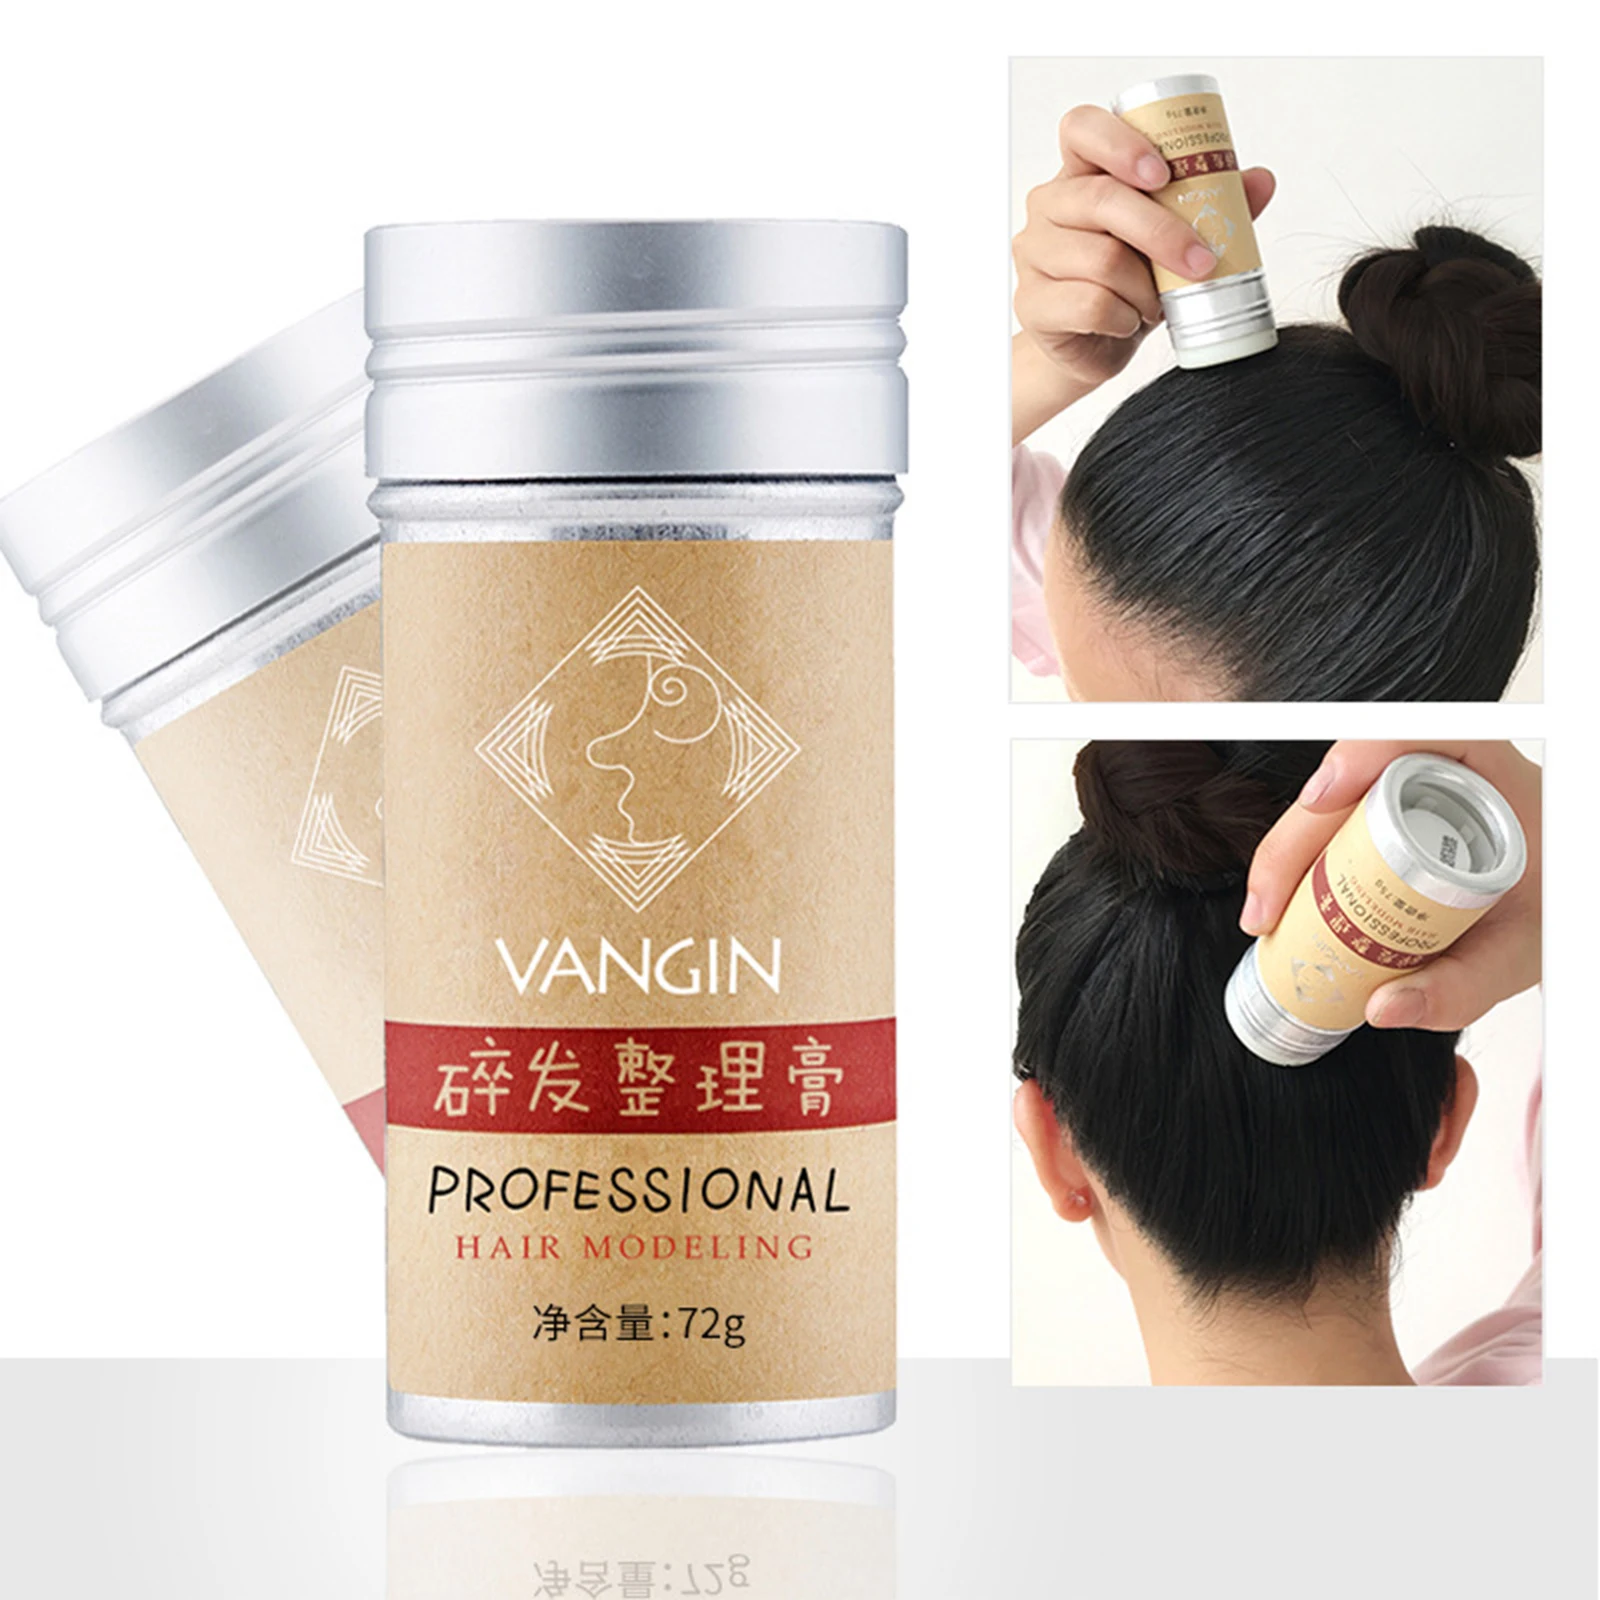 Hair Wax Styling Cream Hold Hair Stick Hair Styling Wax Durable Shaping Fragmented Oil Hair Care Long Lasting Hair Styling Waxes